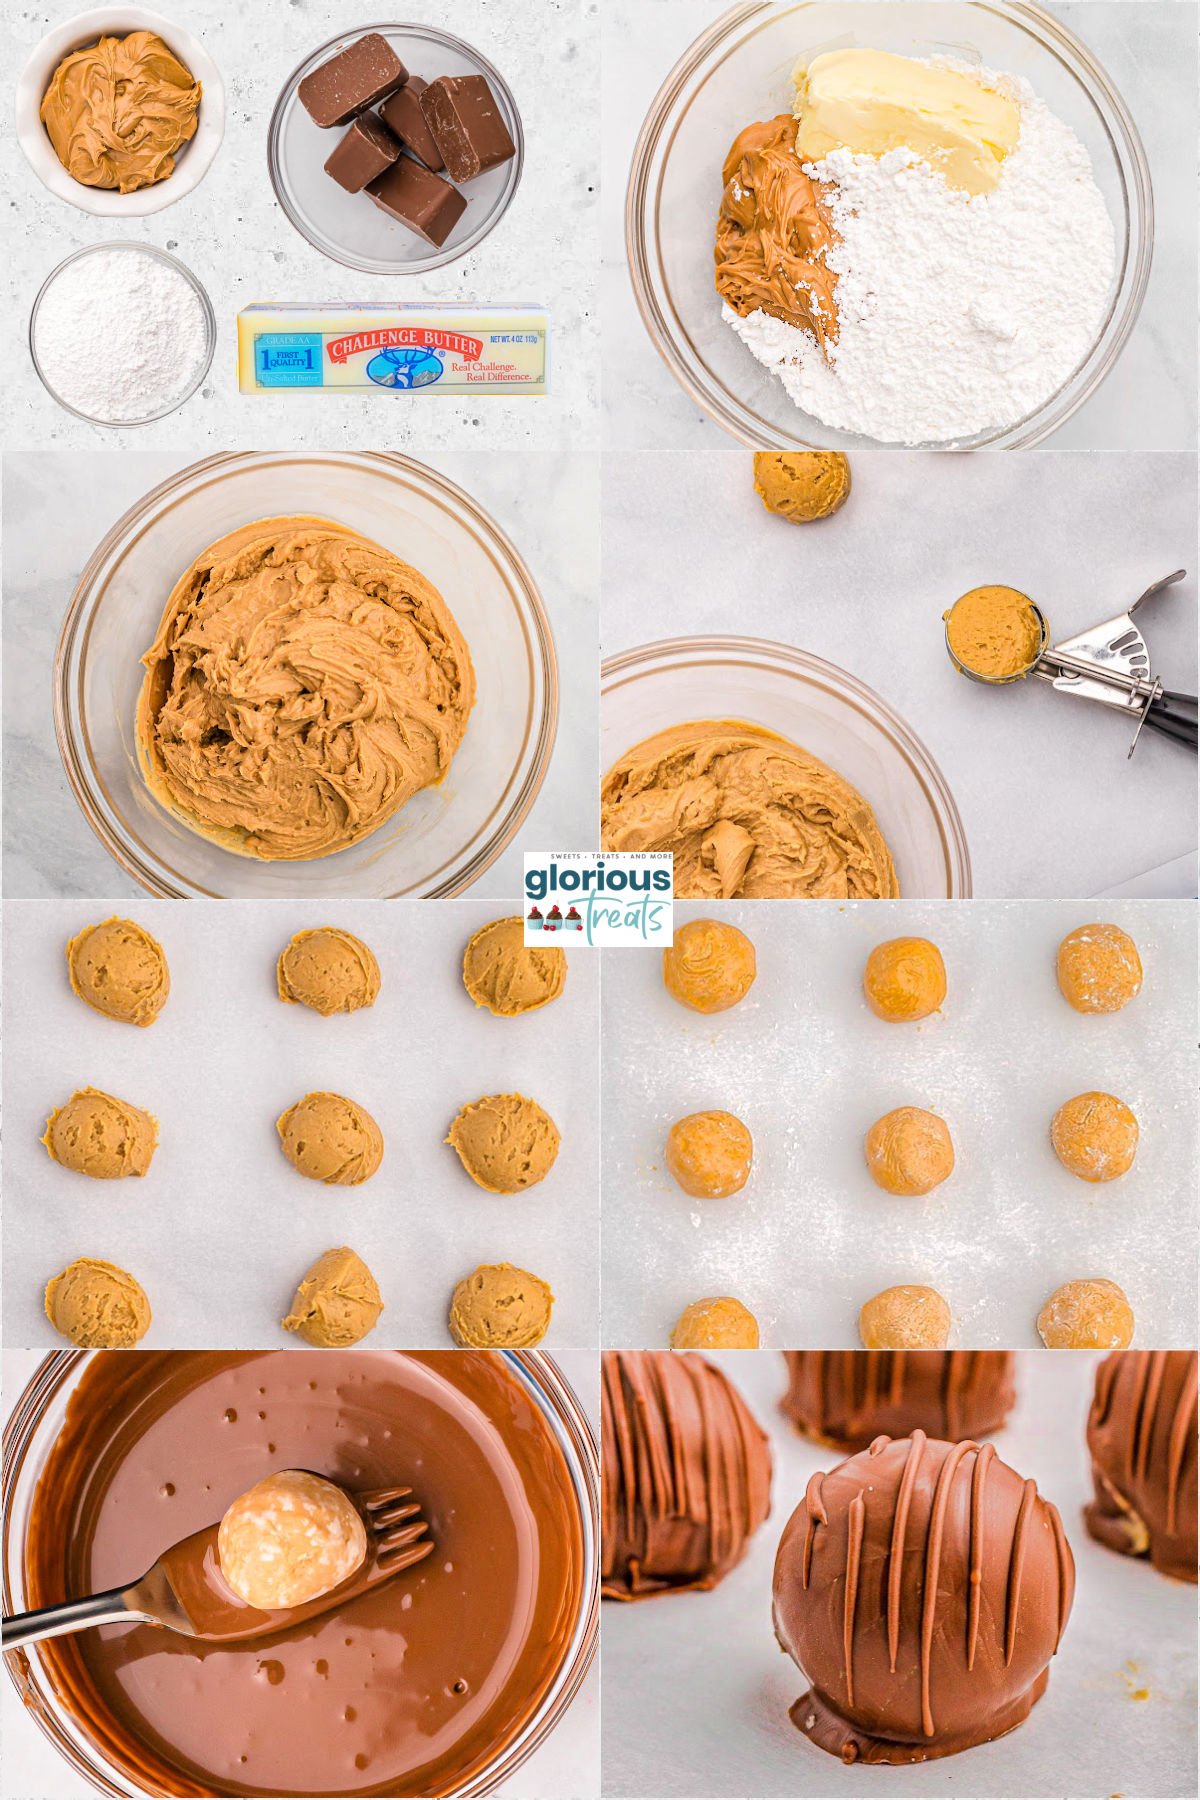 eight image collage showing how to make peanut butter balls step by step.